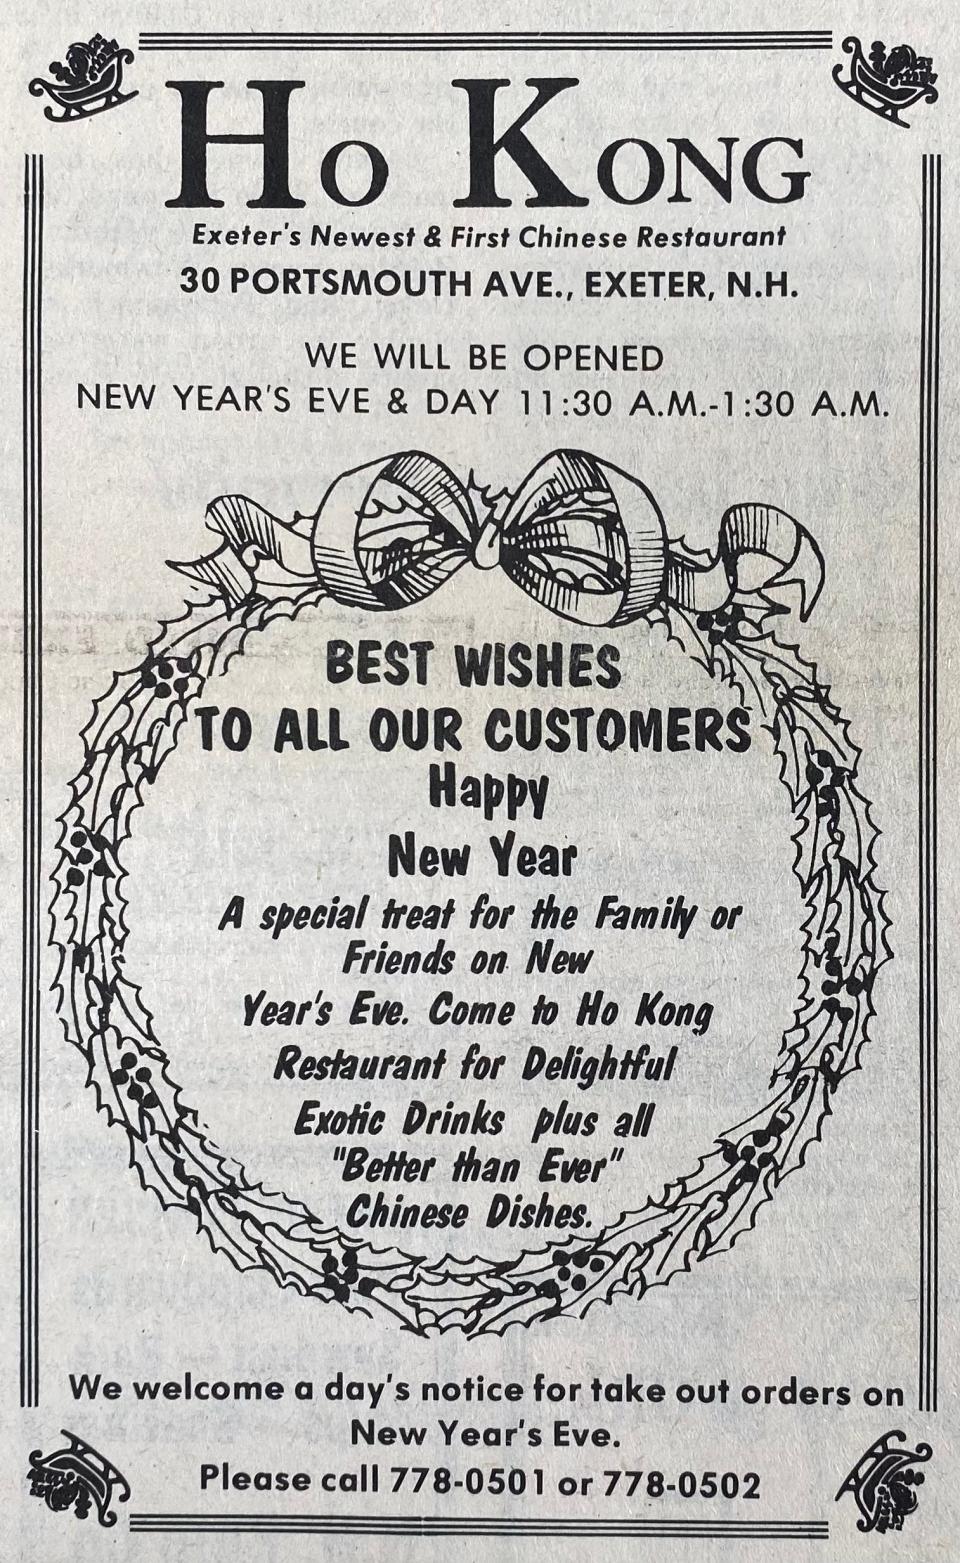 Ho Kong could rightly claim to be “Exeter’s Newest and First Chinese Restaurant” in this advertisement from 1978. It was also the only one available for take-out during the holiday season.